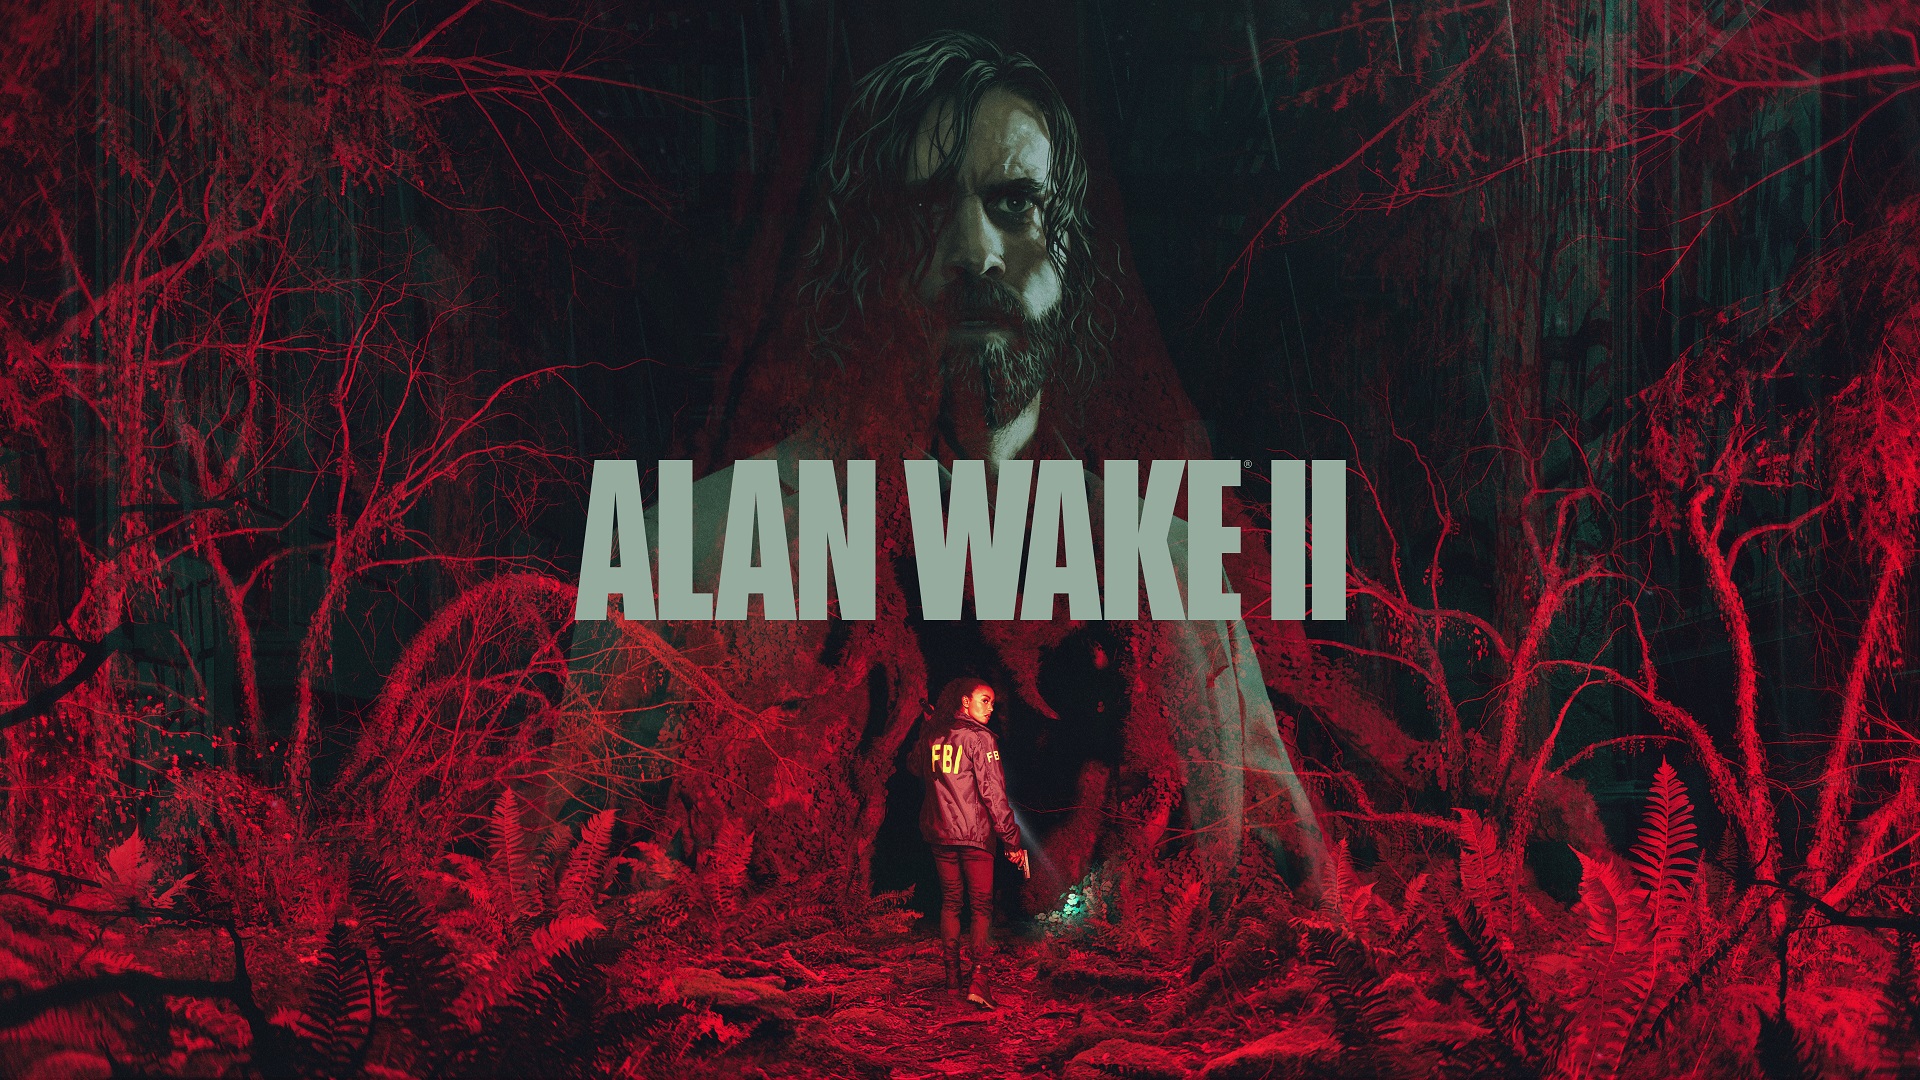 Alan Wake II release date is set for October